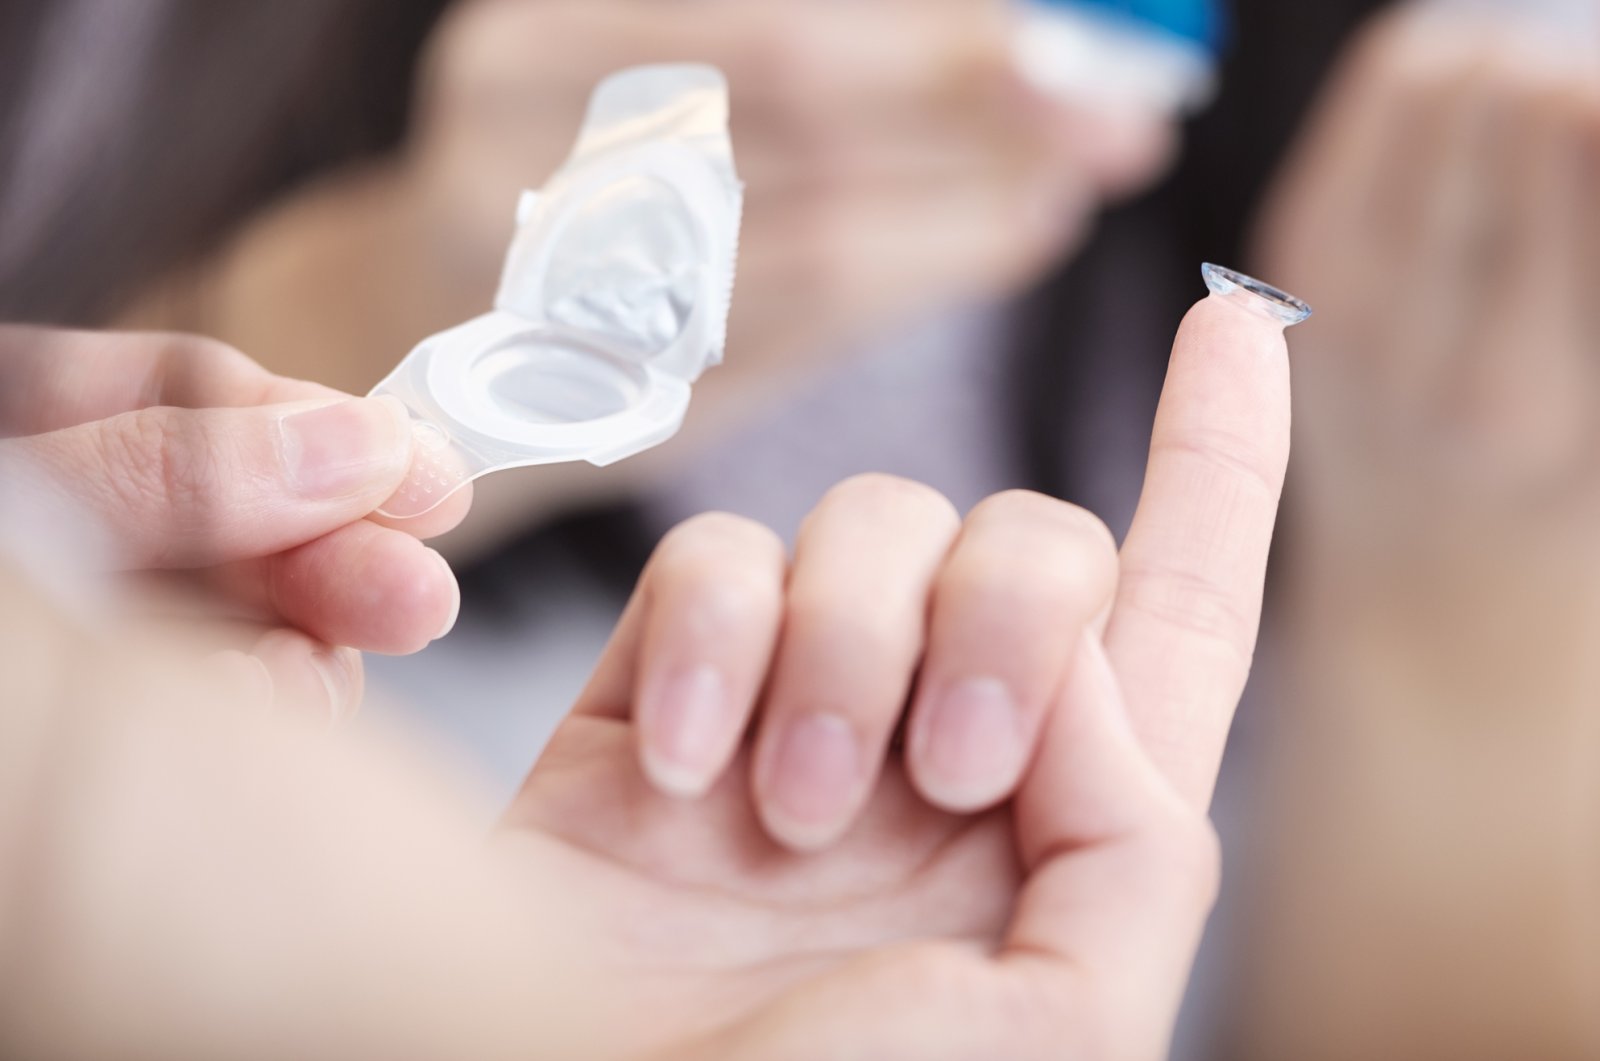 If you have to use contact lenses, you should be really careful about hygiene. (iStock Photo)